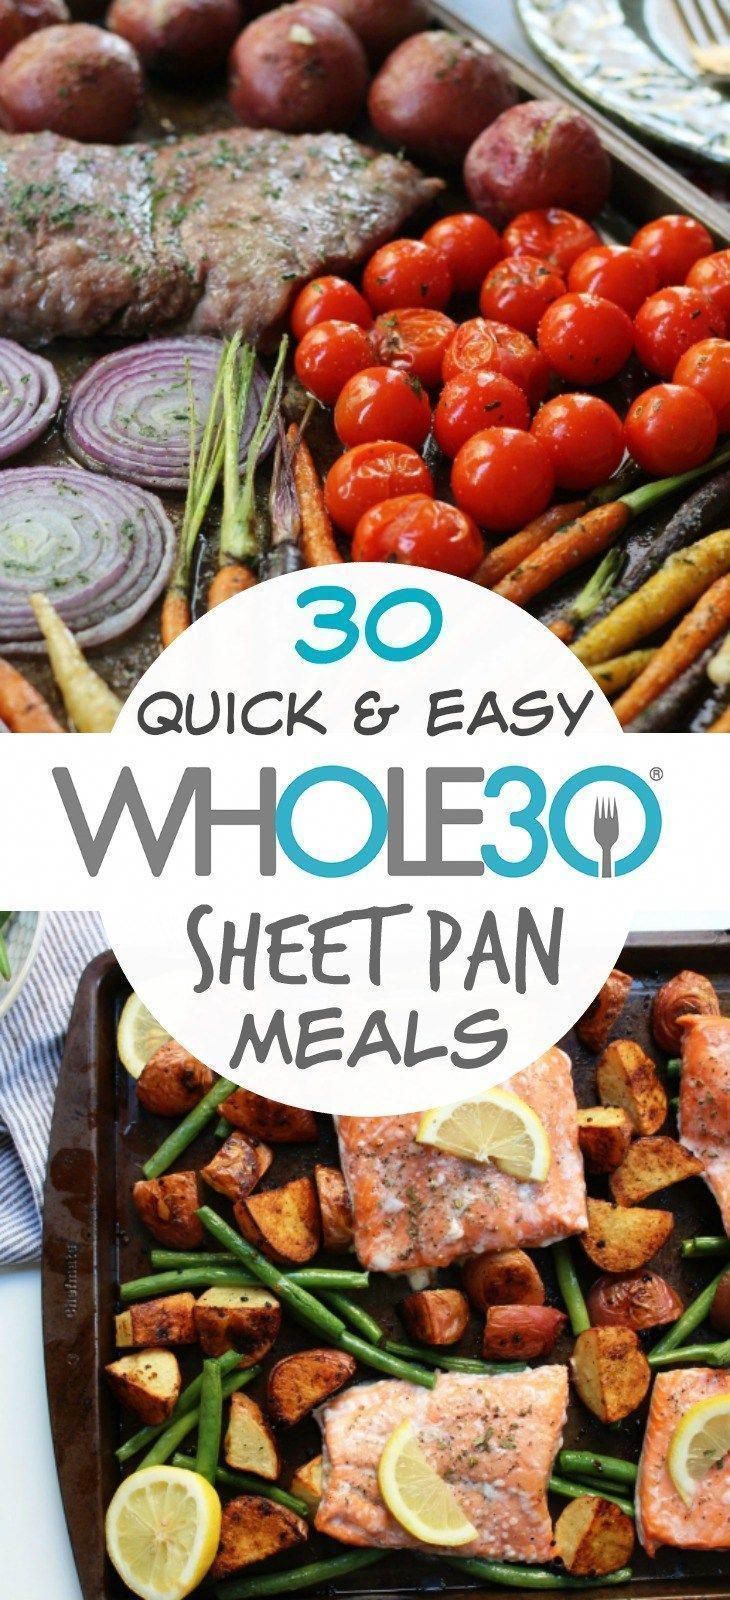 30 Whole30 Sheet Pan Recipes: The Best Quick and Easy One Pan Meals - Whole Kitchen Sink -   18 healthy recipes For Weight Loss clean eating ideas